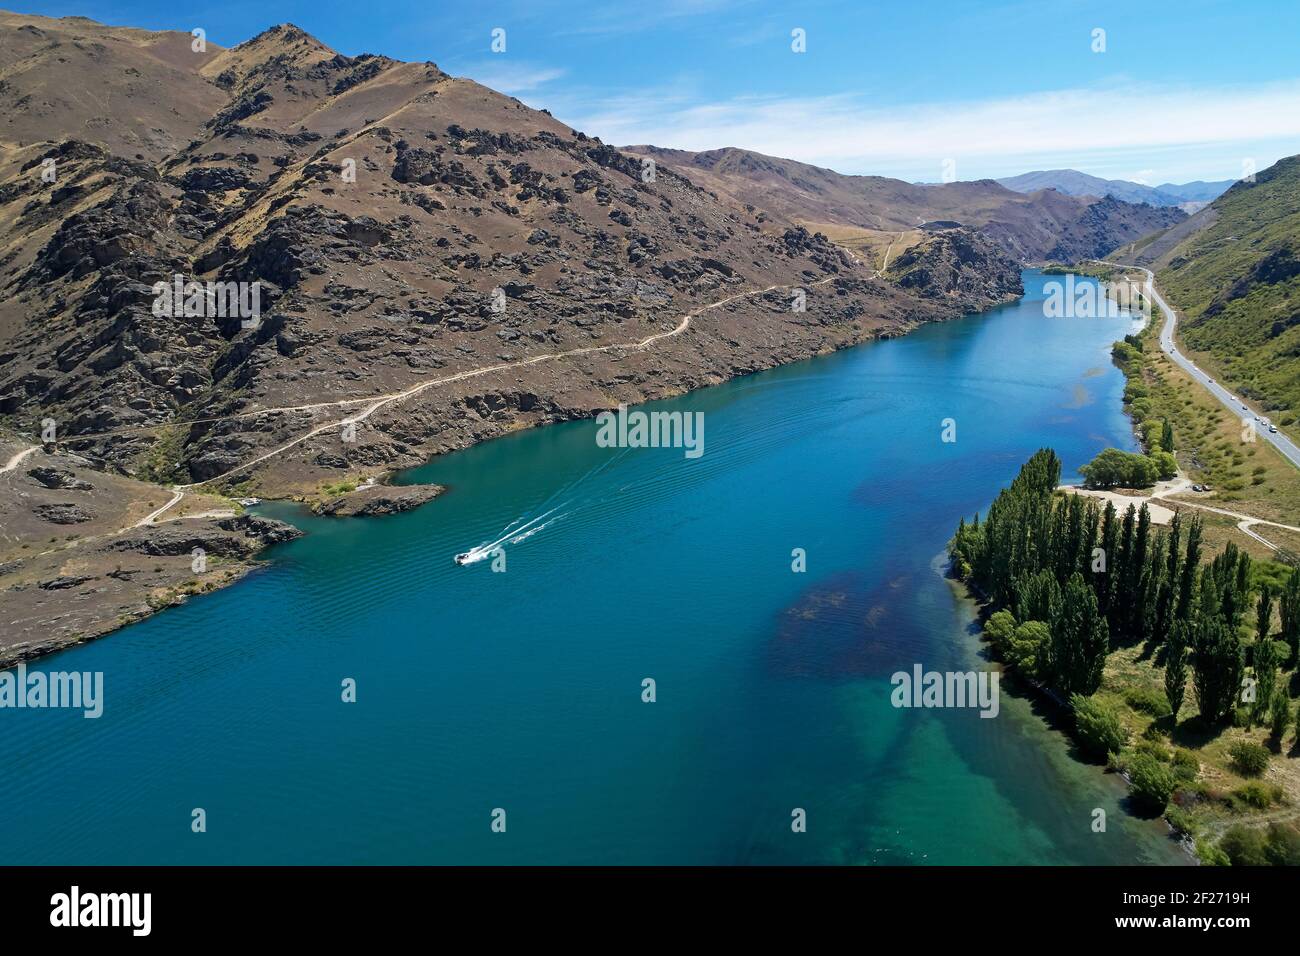 Lake Dunstan Cycle Trail (links), State Highway 8, Cromwell Gorge (rechts) und Lake Dunstan, nahe Cromwell, Central Otago, Südinsel, Neuseeland Stockfoto